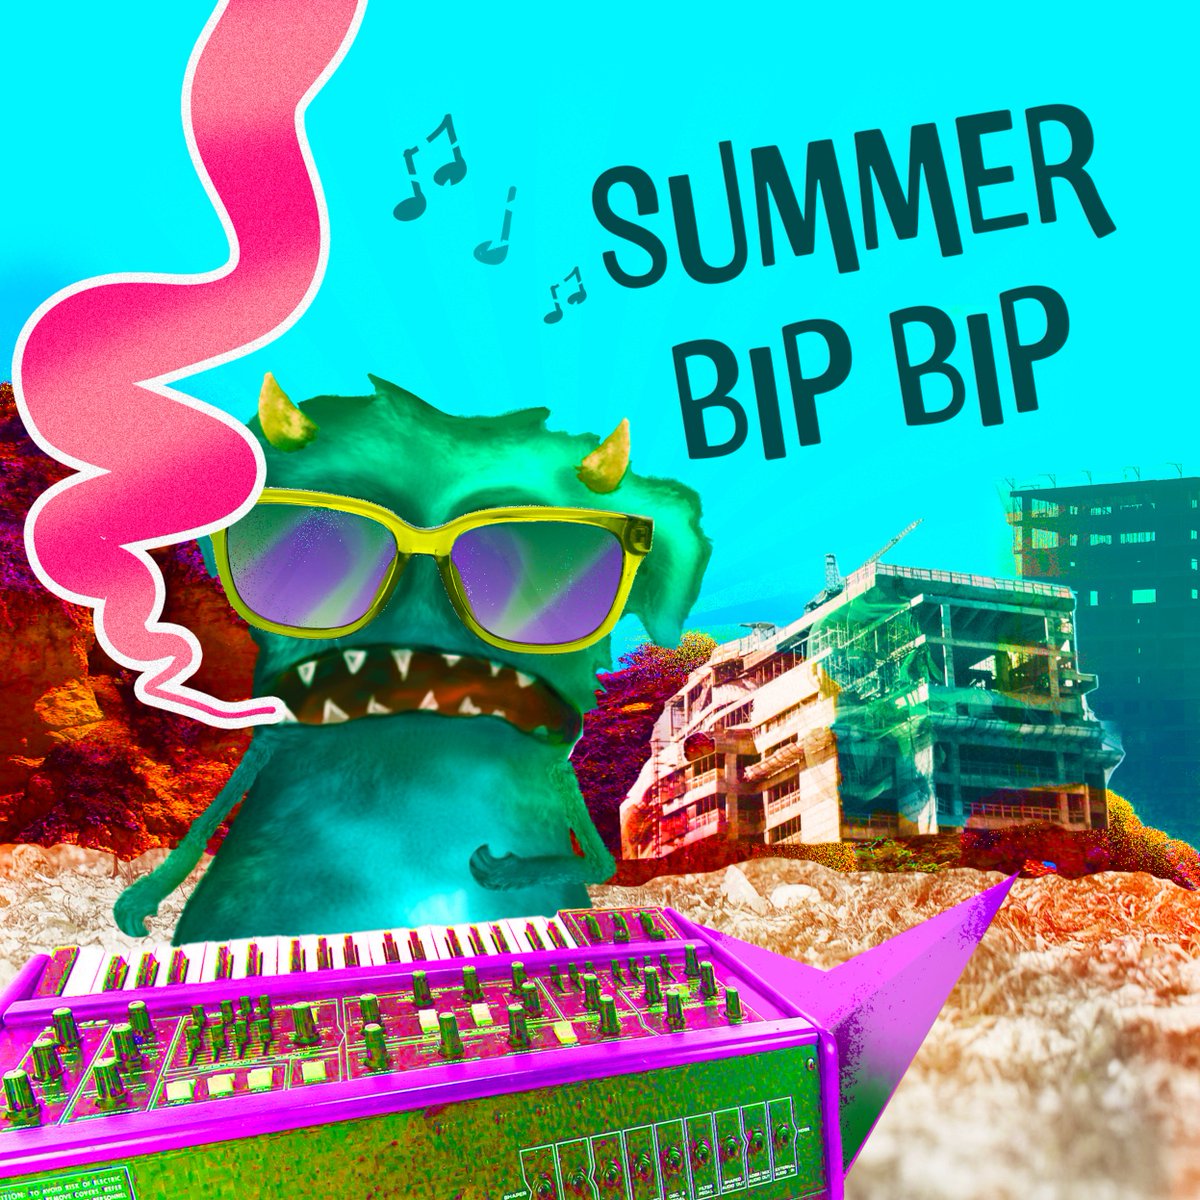 Something new is coming soon: get ready for my new single “Summer Bip Bip” out on June 23rd. This bright and colorful cover was created by Julien Foll, who was inspired by IA (because we’re in 2023). It gives off a utopian vibe that I like. ➡️ Pre-save: idol-io.ffm.to/summerbipbip